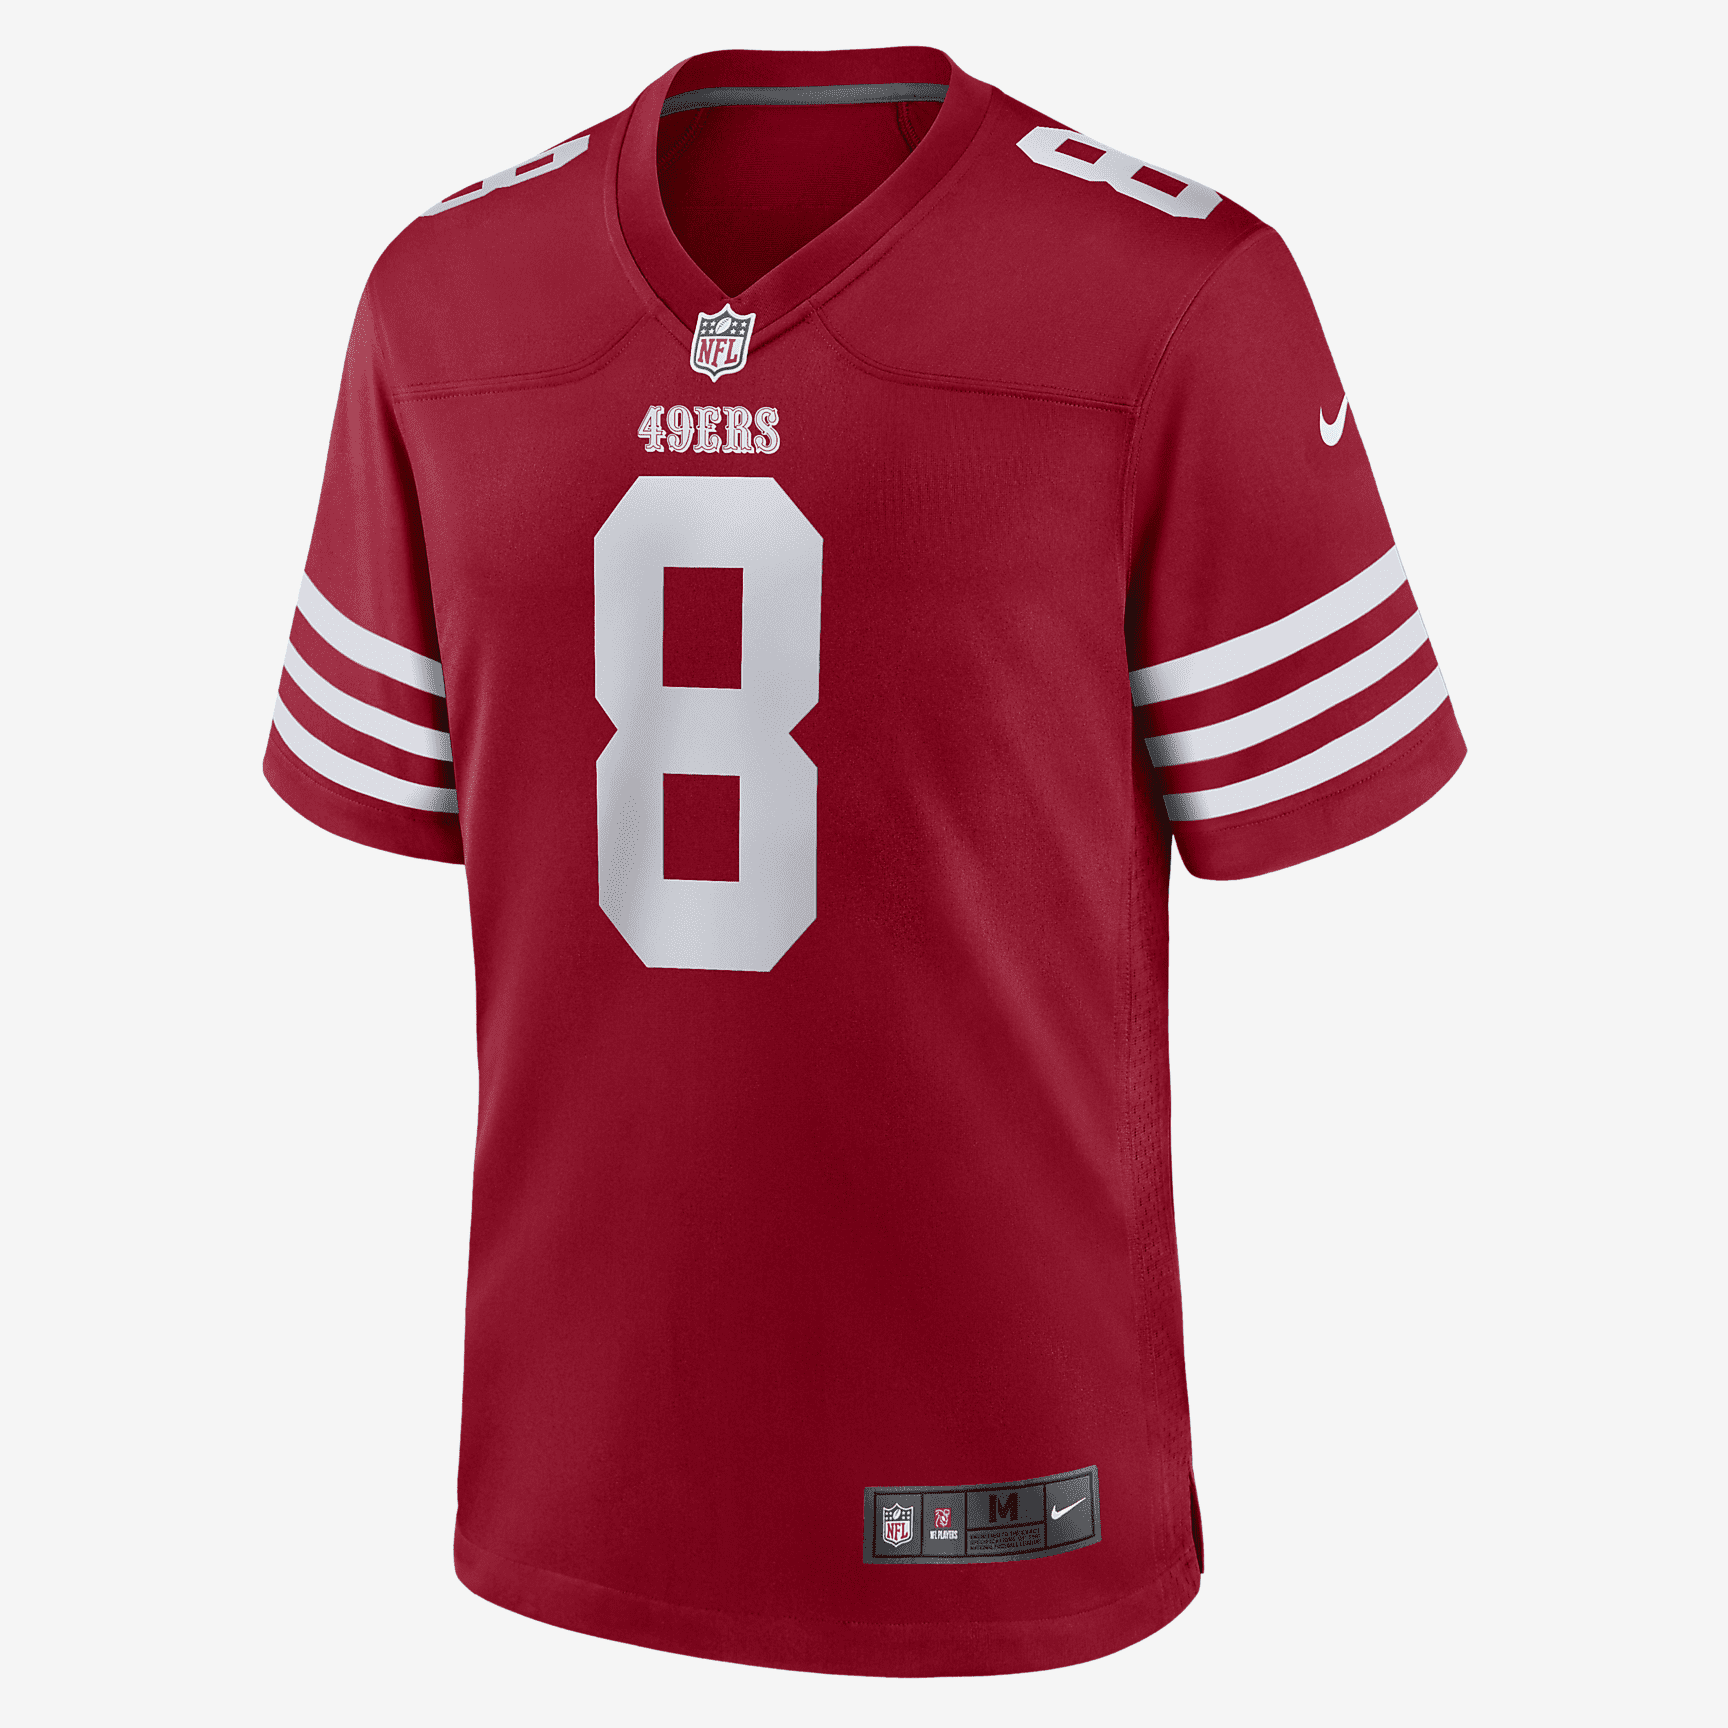 NFL San Francisco 49ers (Steve Young) Men's Game Football Jersey